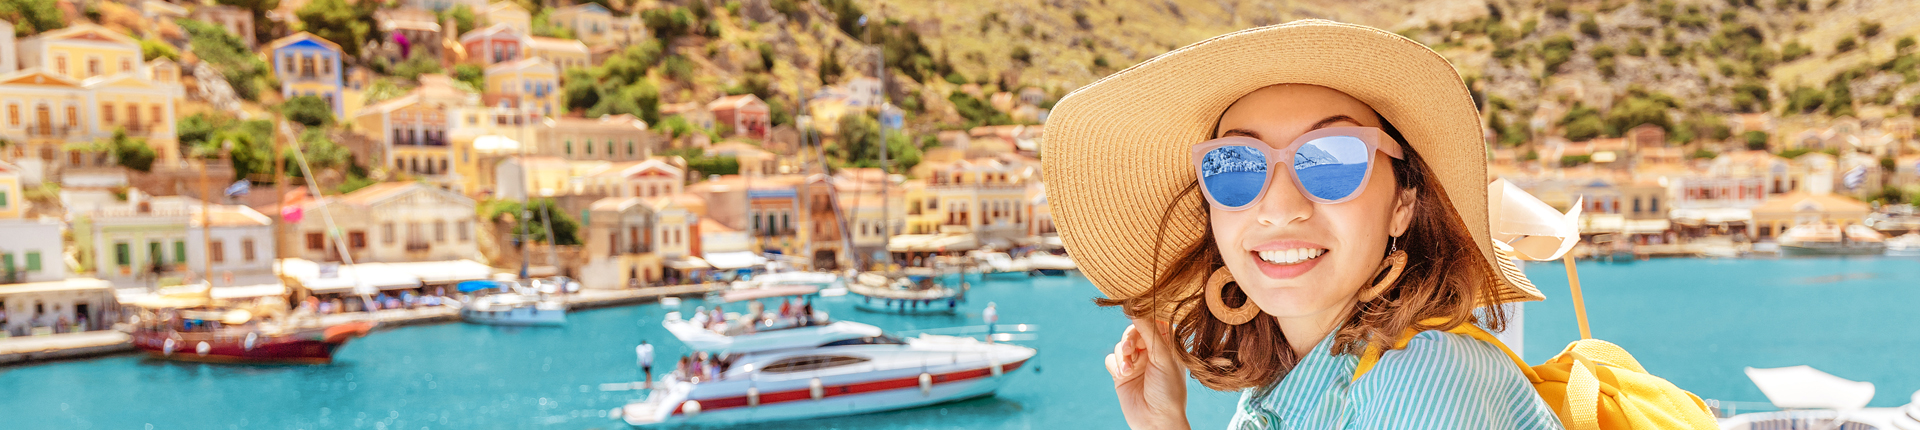 Asian girl traveler with backpack and hat enjoys a sea cruise on a open ship deck. Tourism and vacation in Greece and mediterranean sra. Transport and travel inspiration